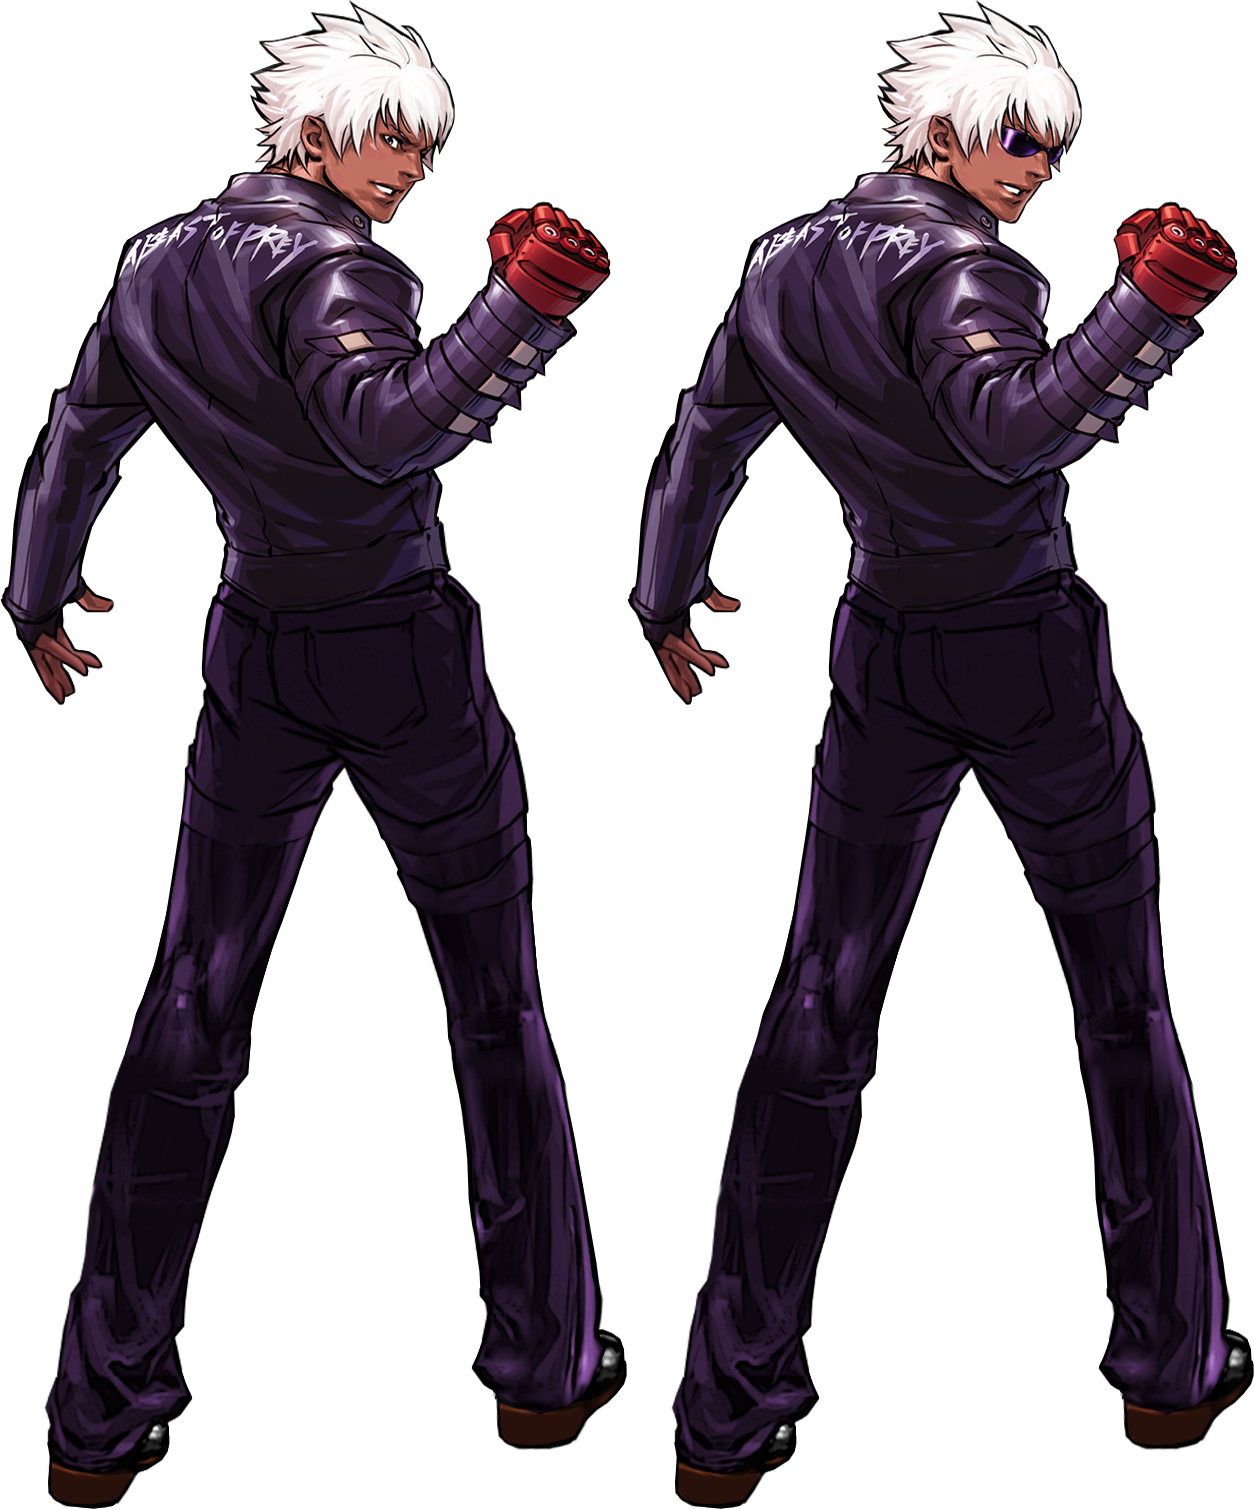 Ralf KOF 2002UM Edit  King of fighters, Street fighter characters